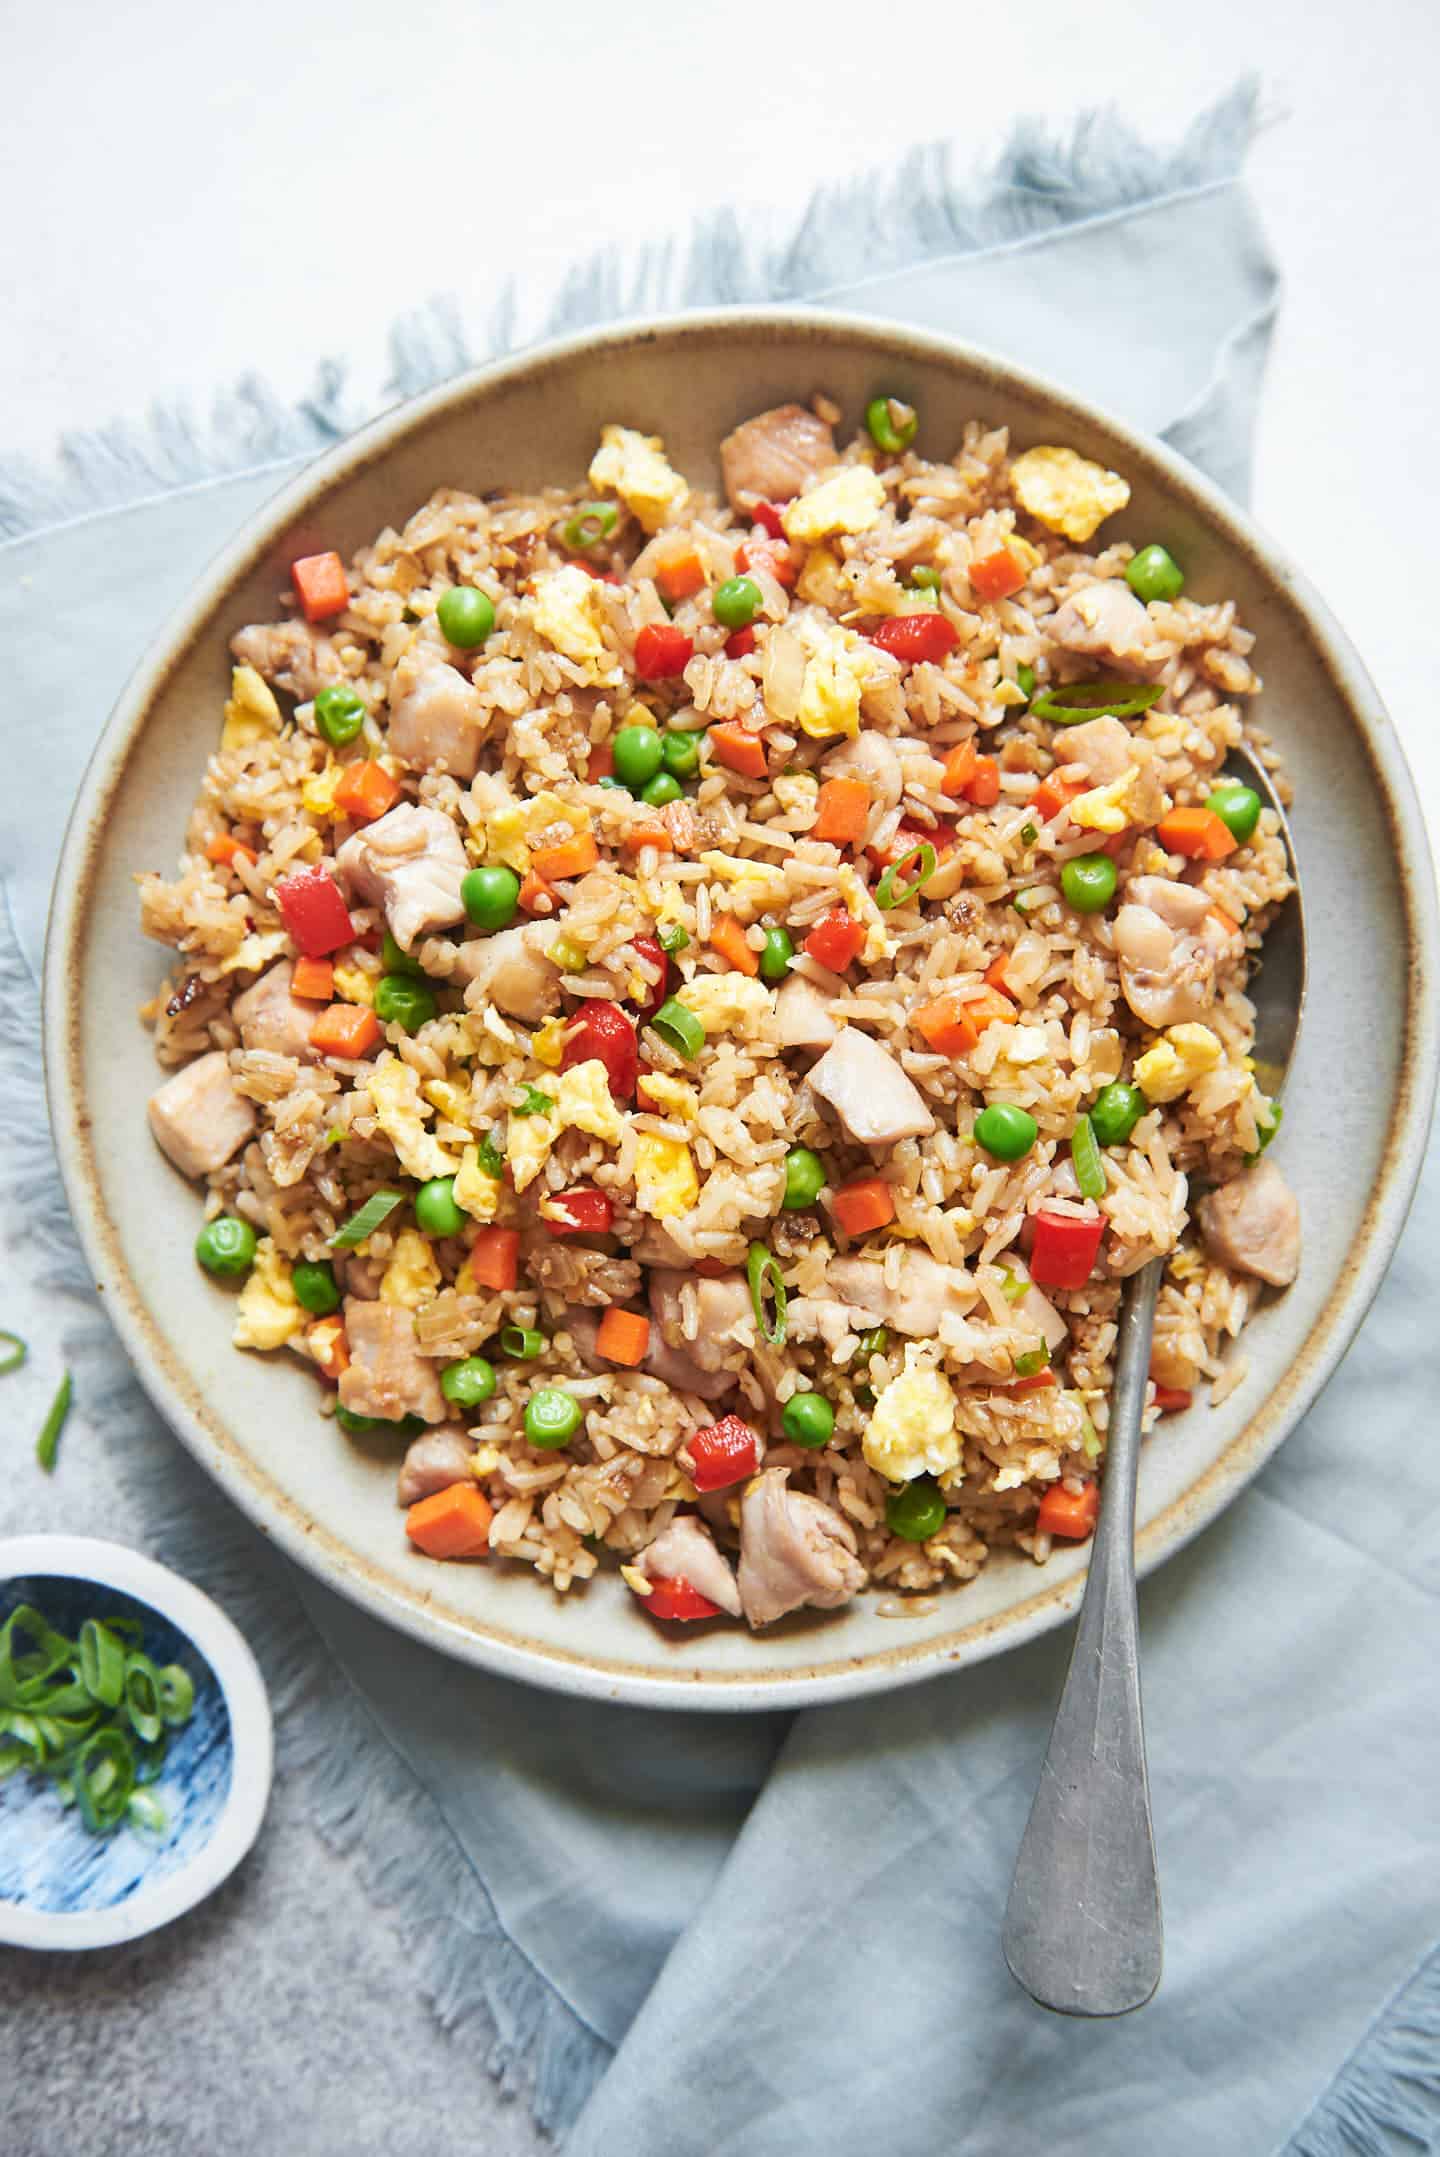 Chicken Fried Rice Recipe - a simple fried rice ready in 30 minutes!